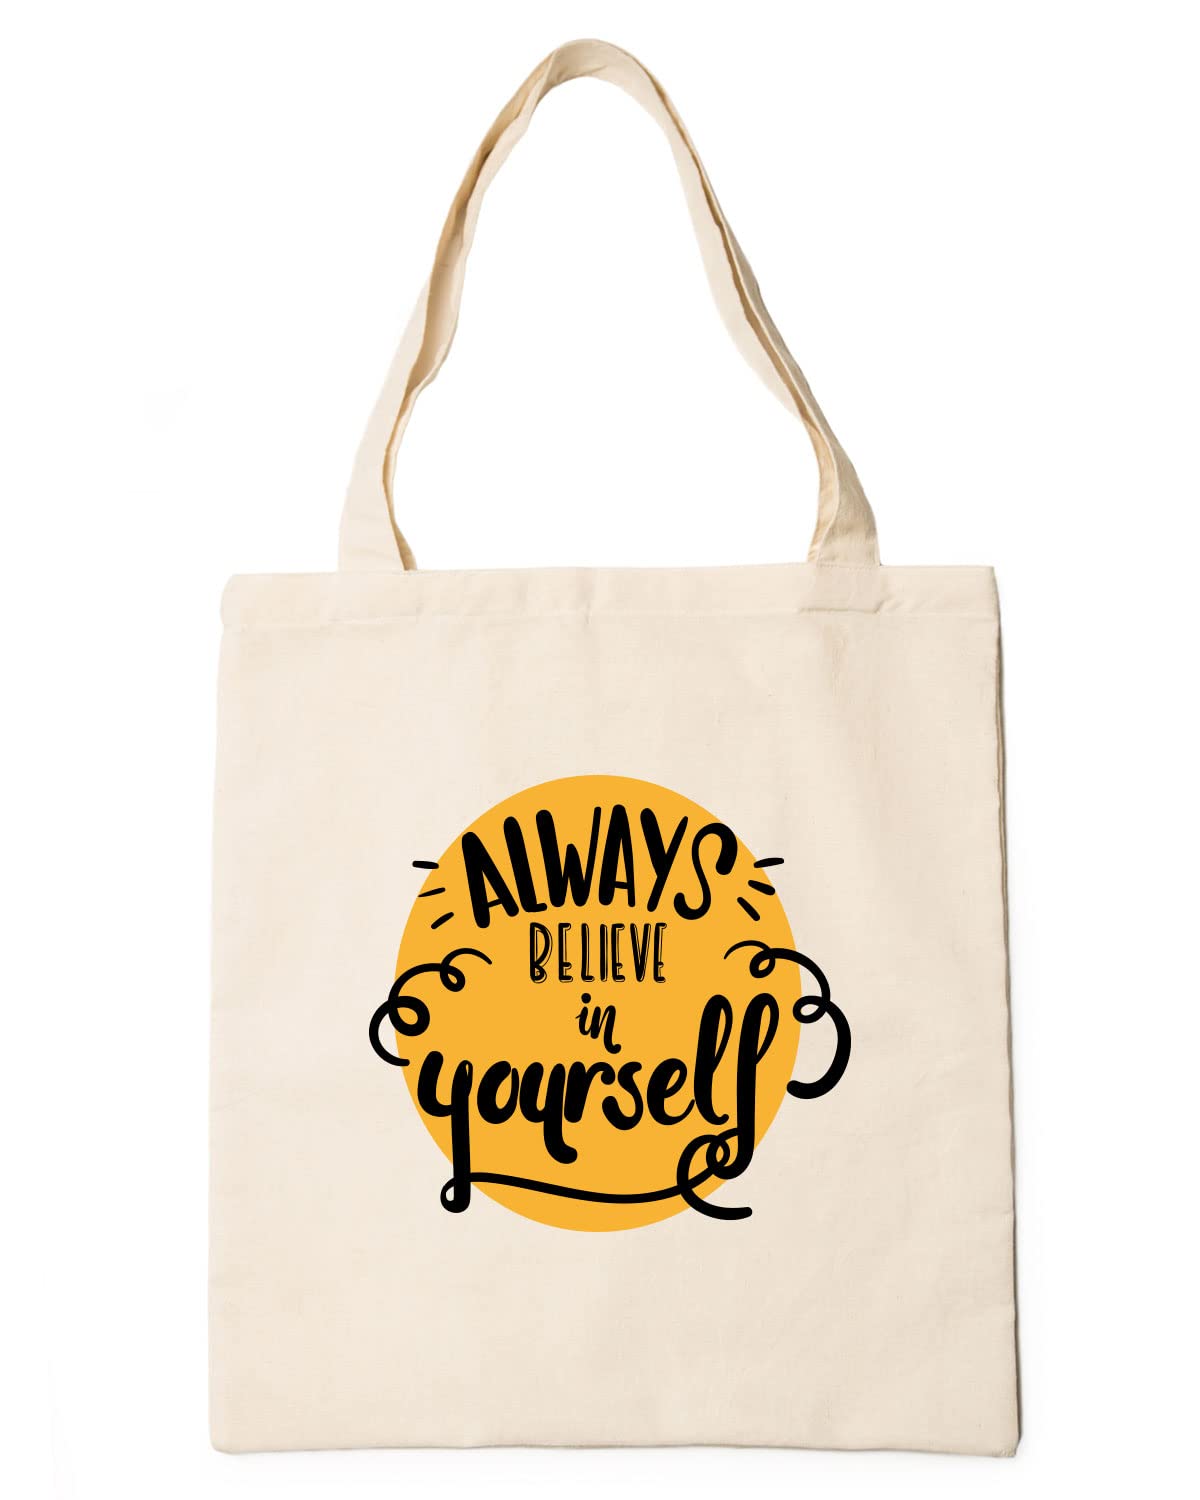 The Pink Magnet Always Believe In Yourself Tote Bag - Canvas Tote Bag for Women | Printed Multipurpose Cotton Bags | Cute Hand Bag for Girls | Best for College, Travel, Grocery | Reusable Shopping Bag | Eco-Friendly Tote Bag